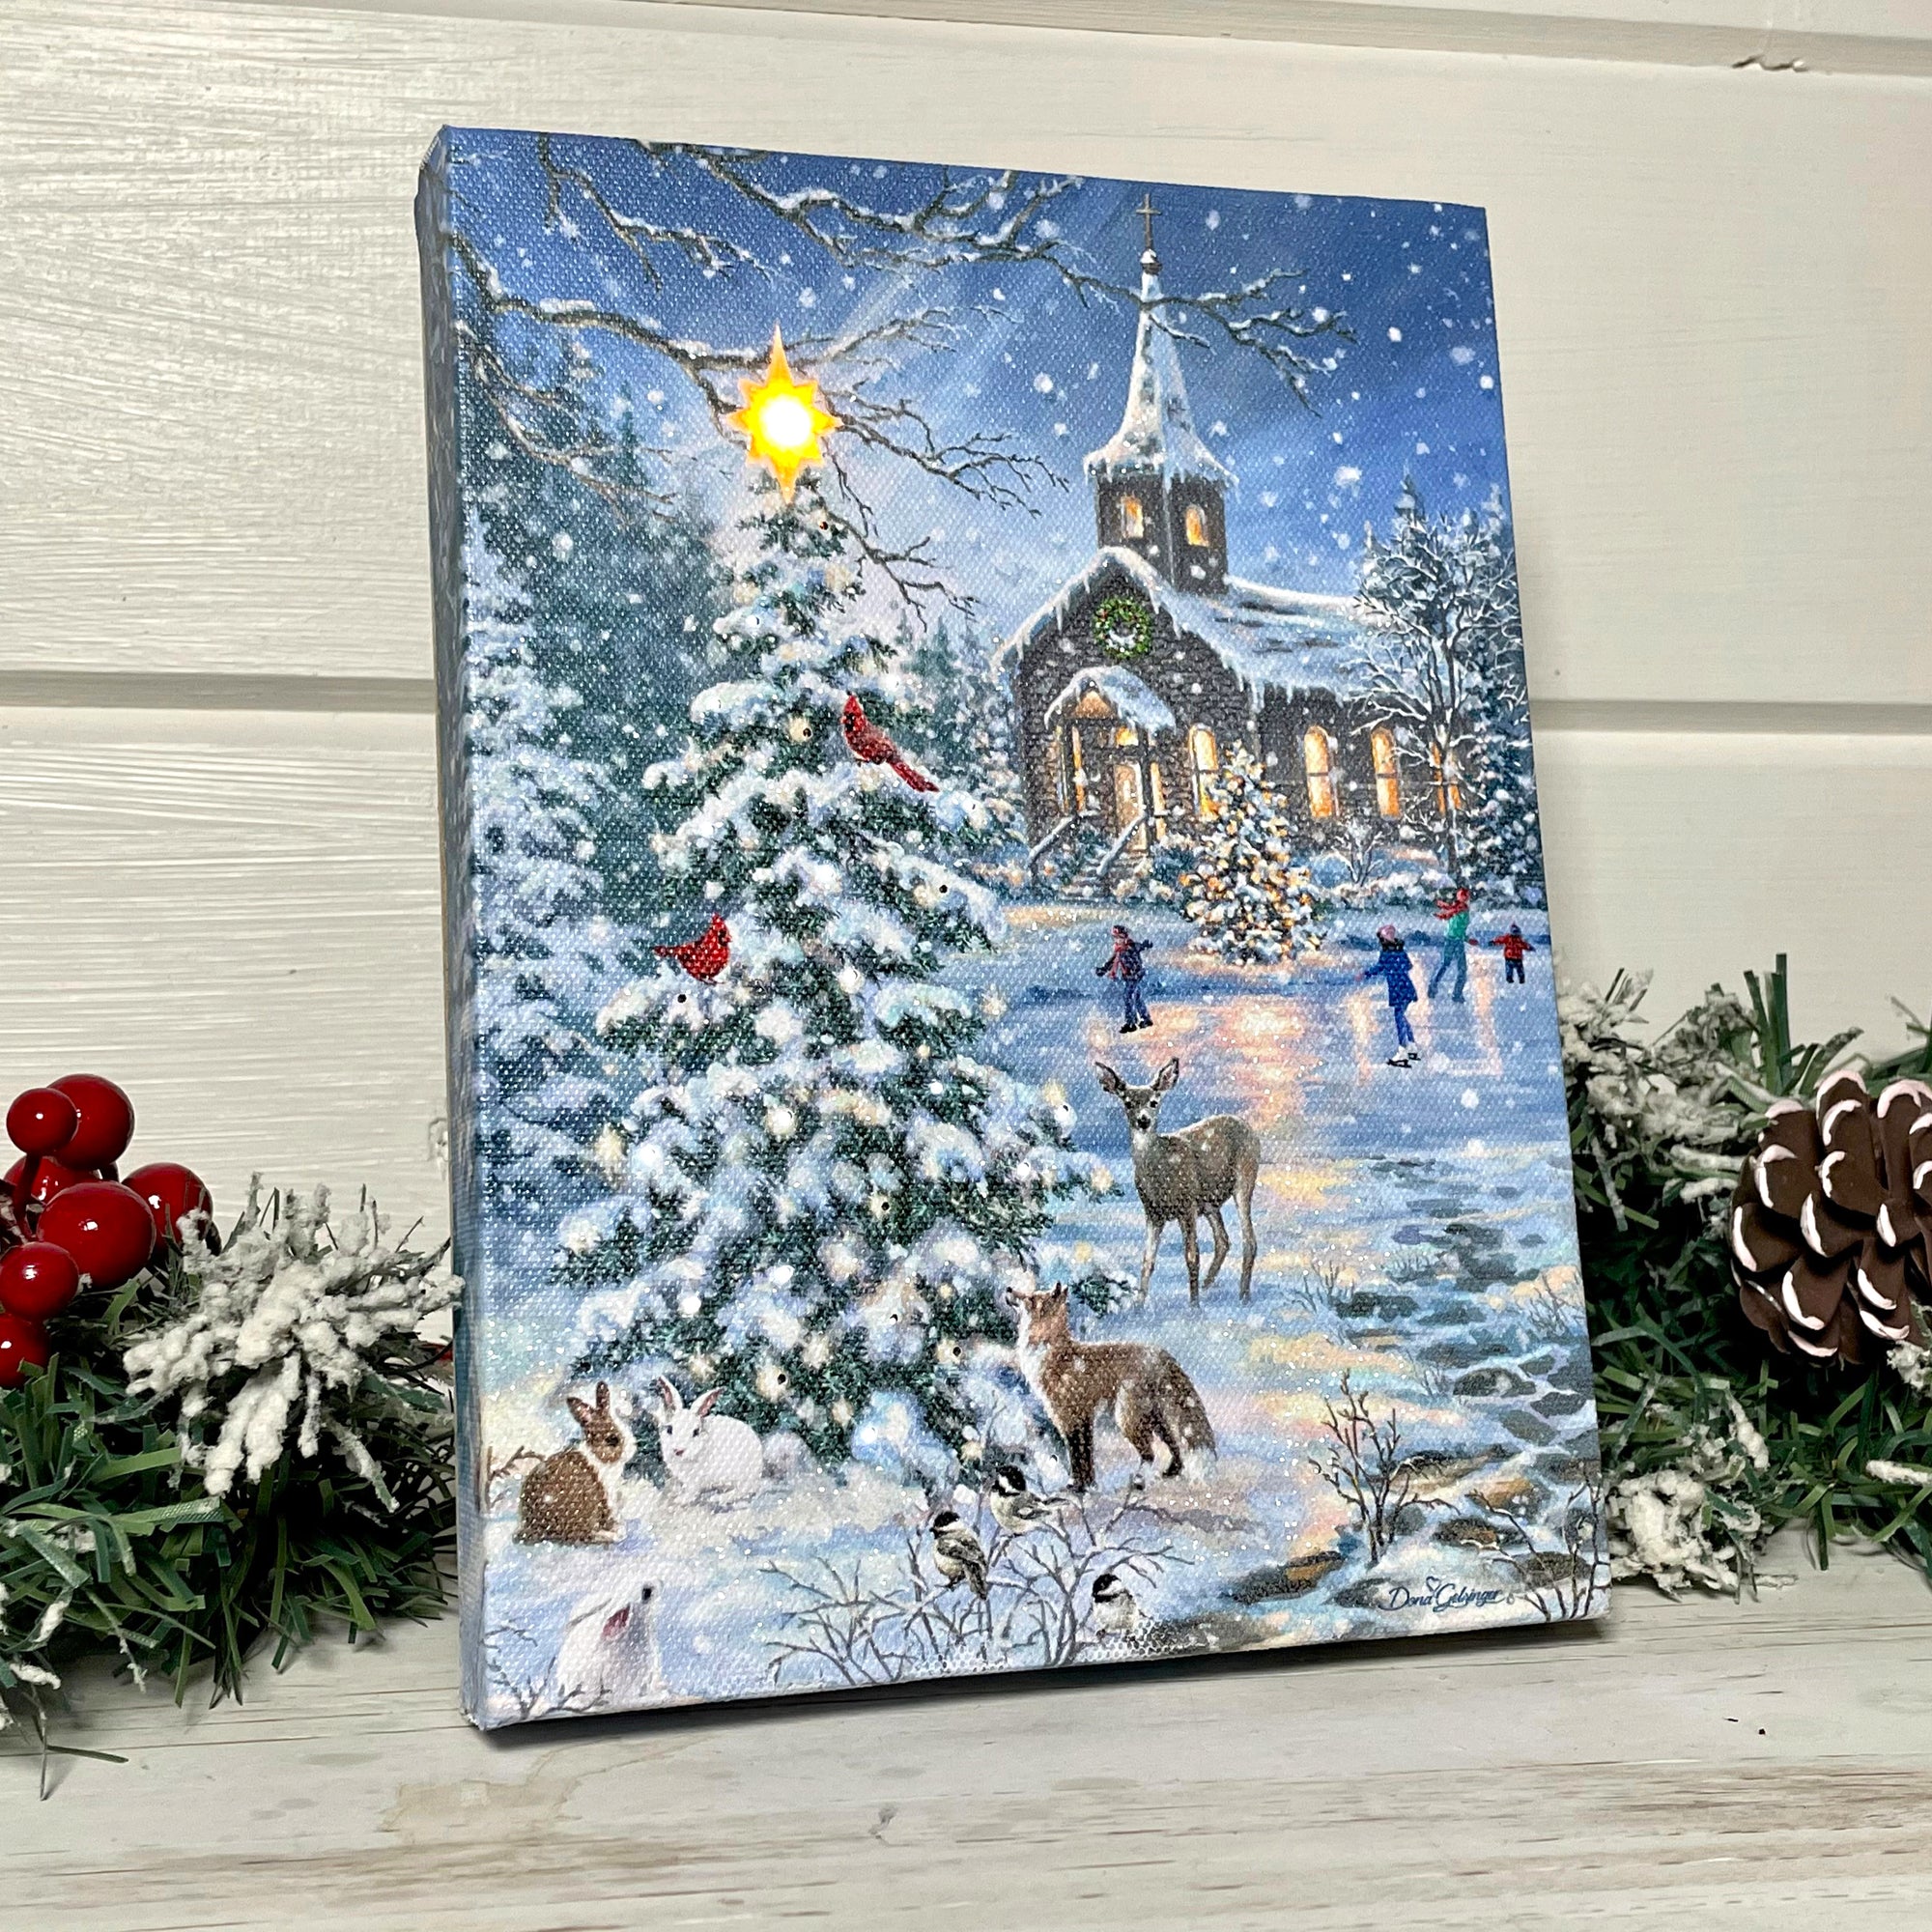 This beautifully crafted canvas features a stunning snow covered pine tree, adorned with sparkling lights that shine and twinkle in the night. A bright star sits at the very top of the tree, adding an extra touch of charm and wonder to this delightful scene.  As you take a closer look, you'll notice a cast of woodland creatures gathered around the tree, including bunnies, fox, deer, and cardinals.